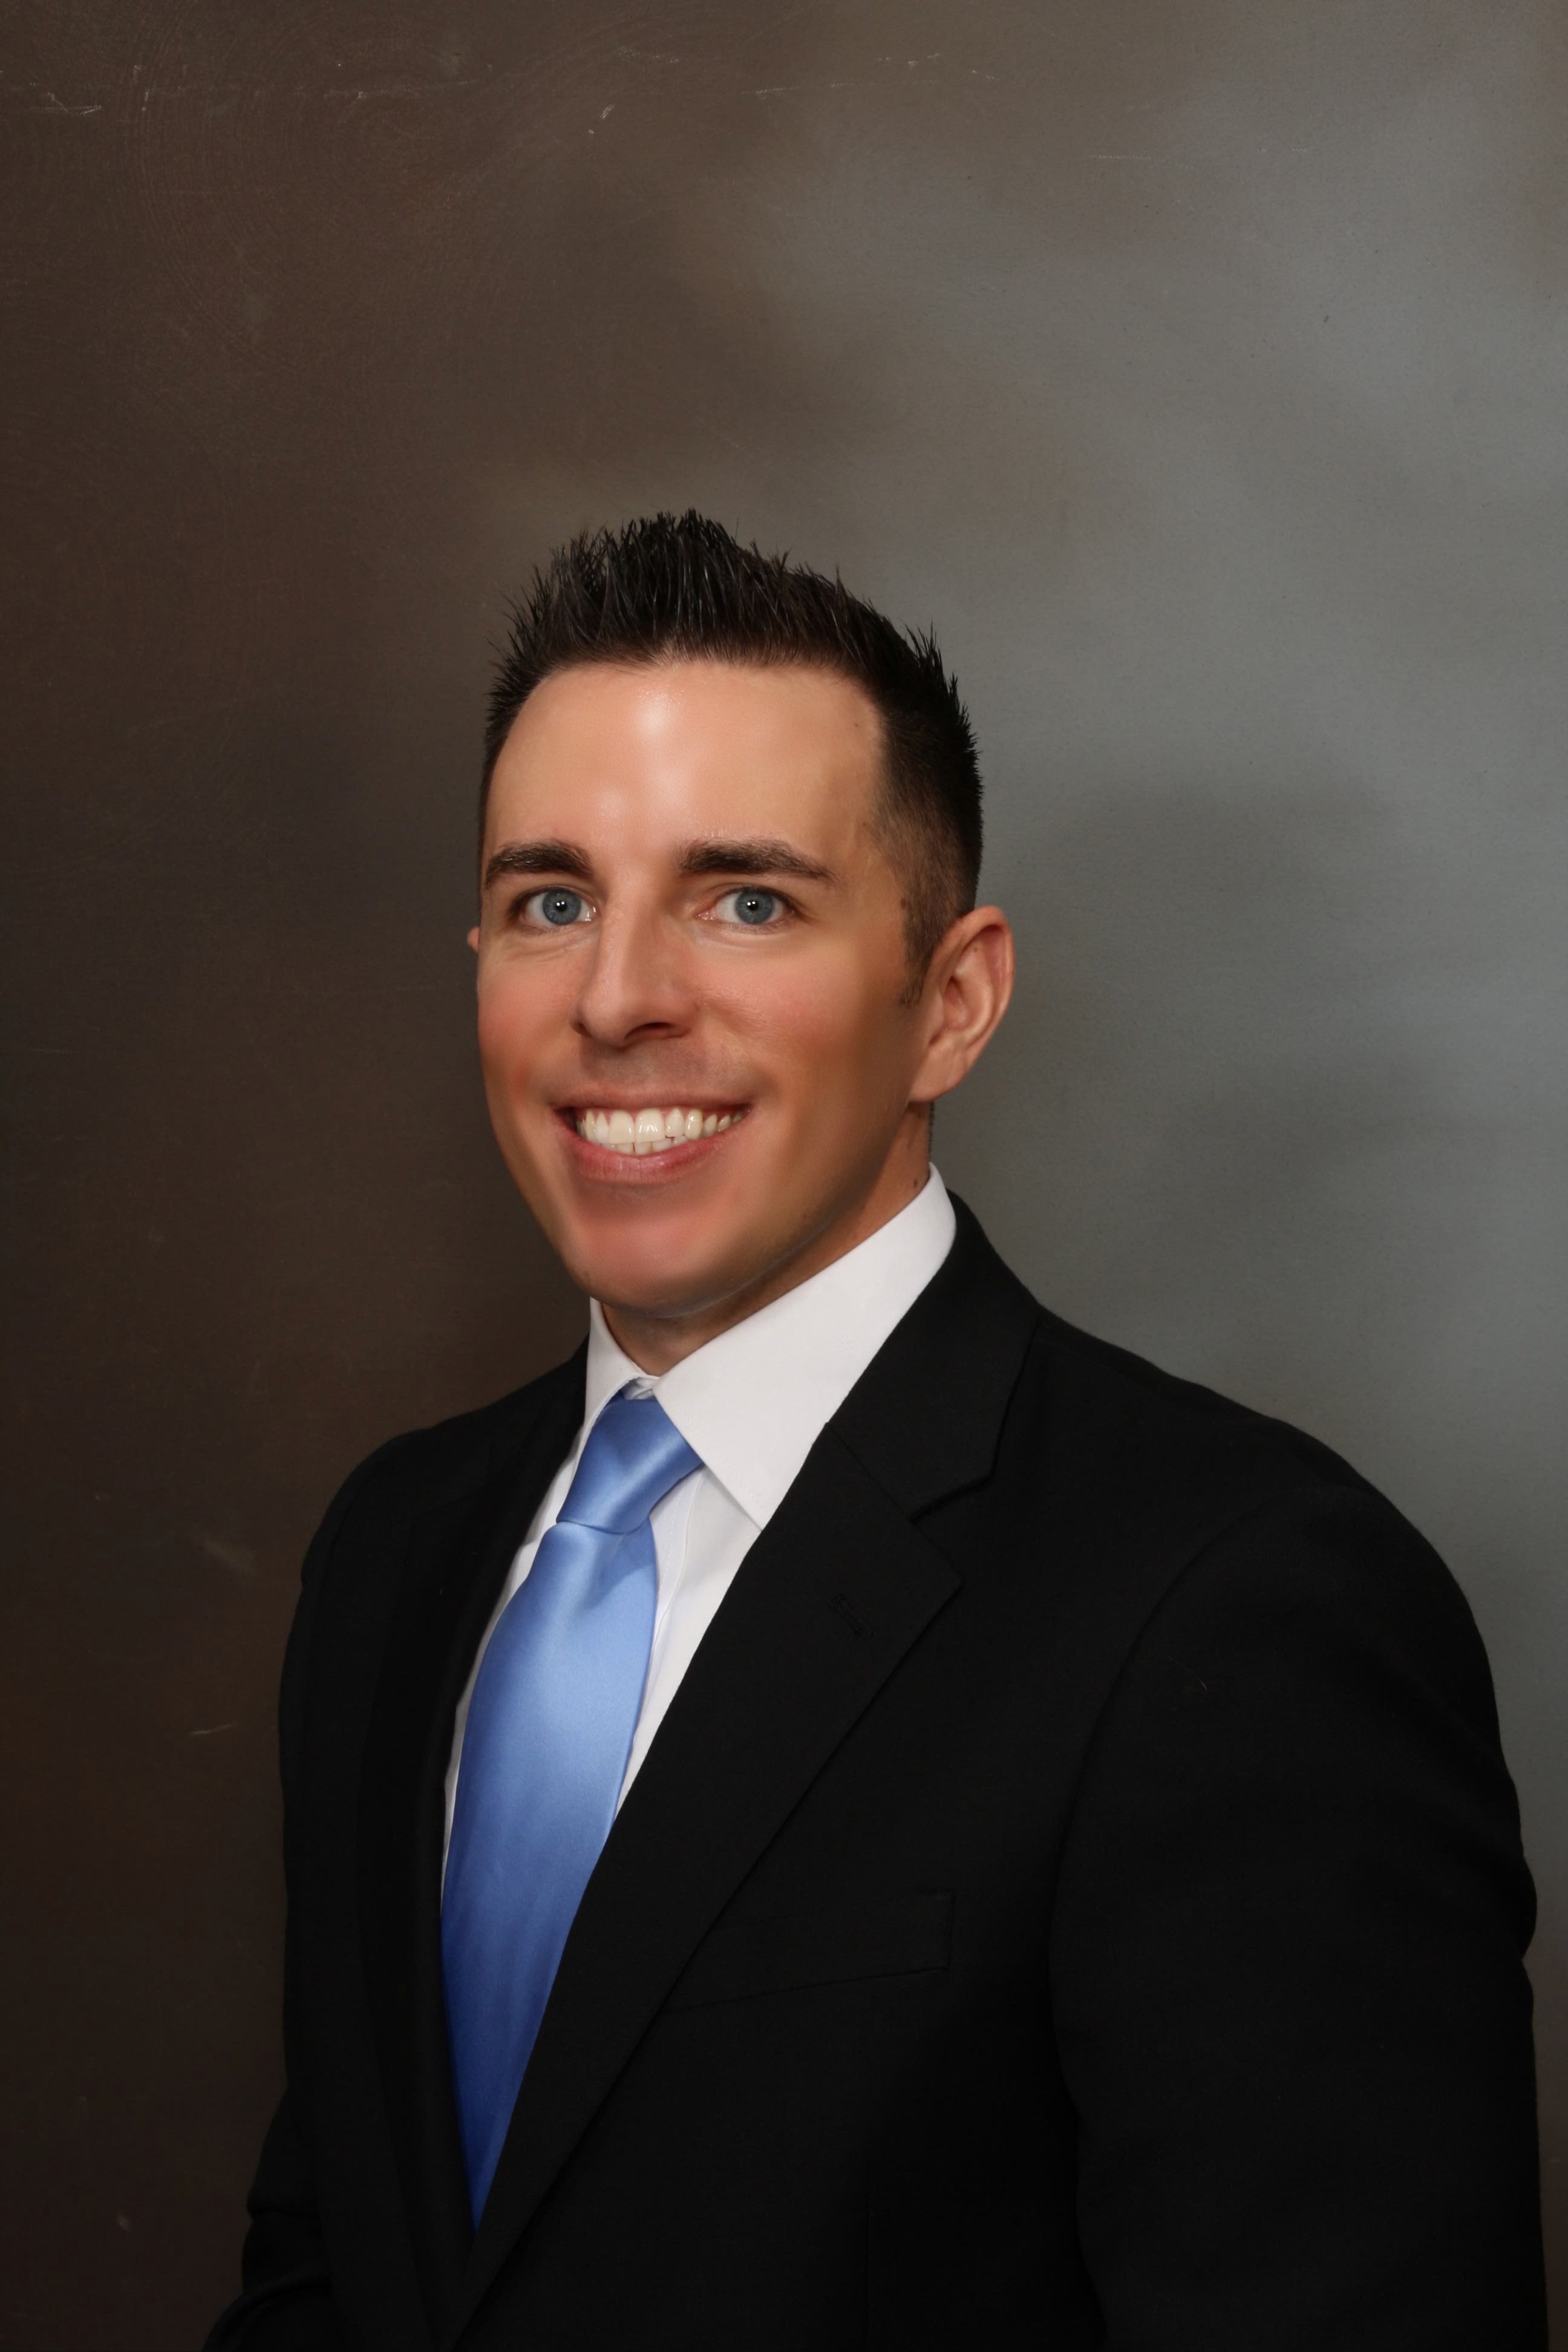 Meet Jeremy Brown, Branch Manager of PNC Bank